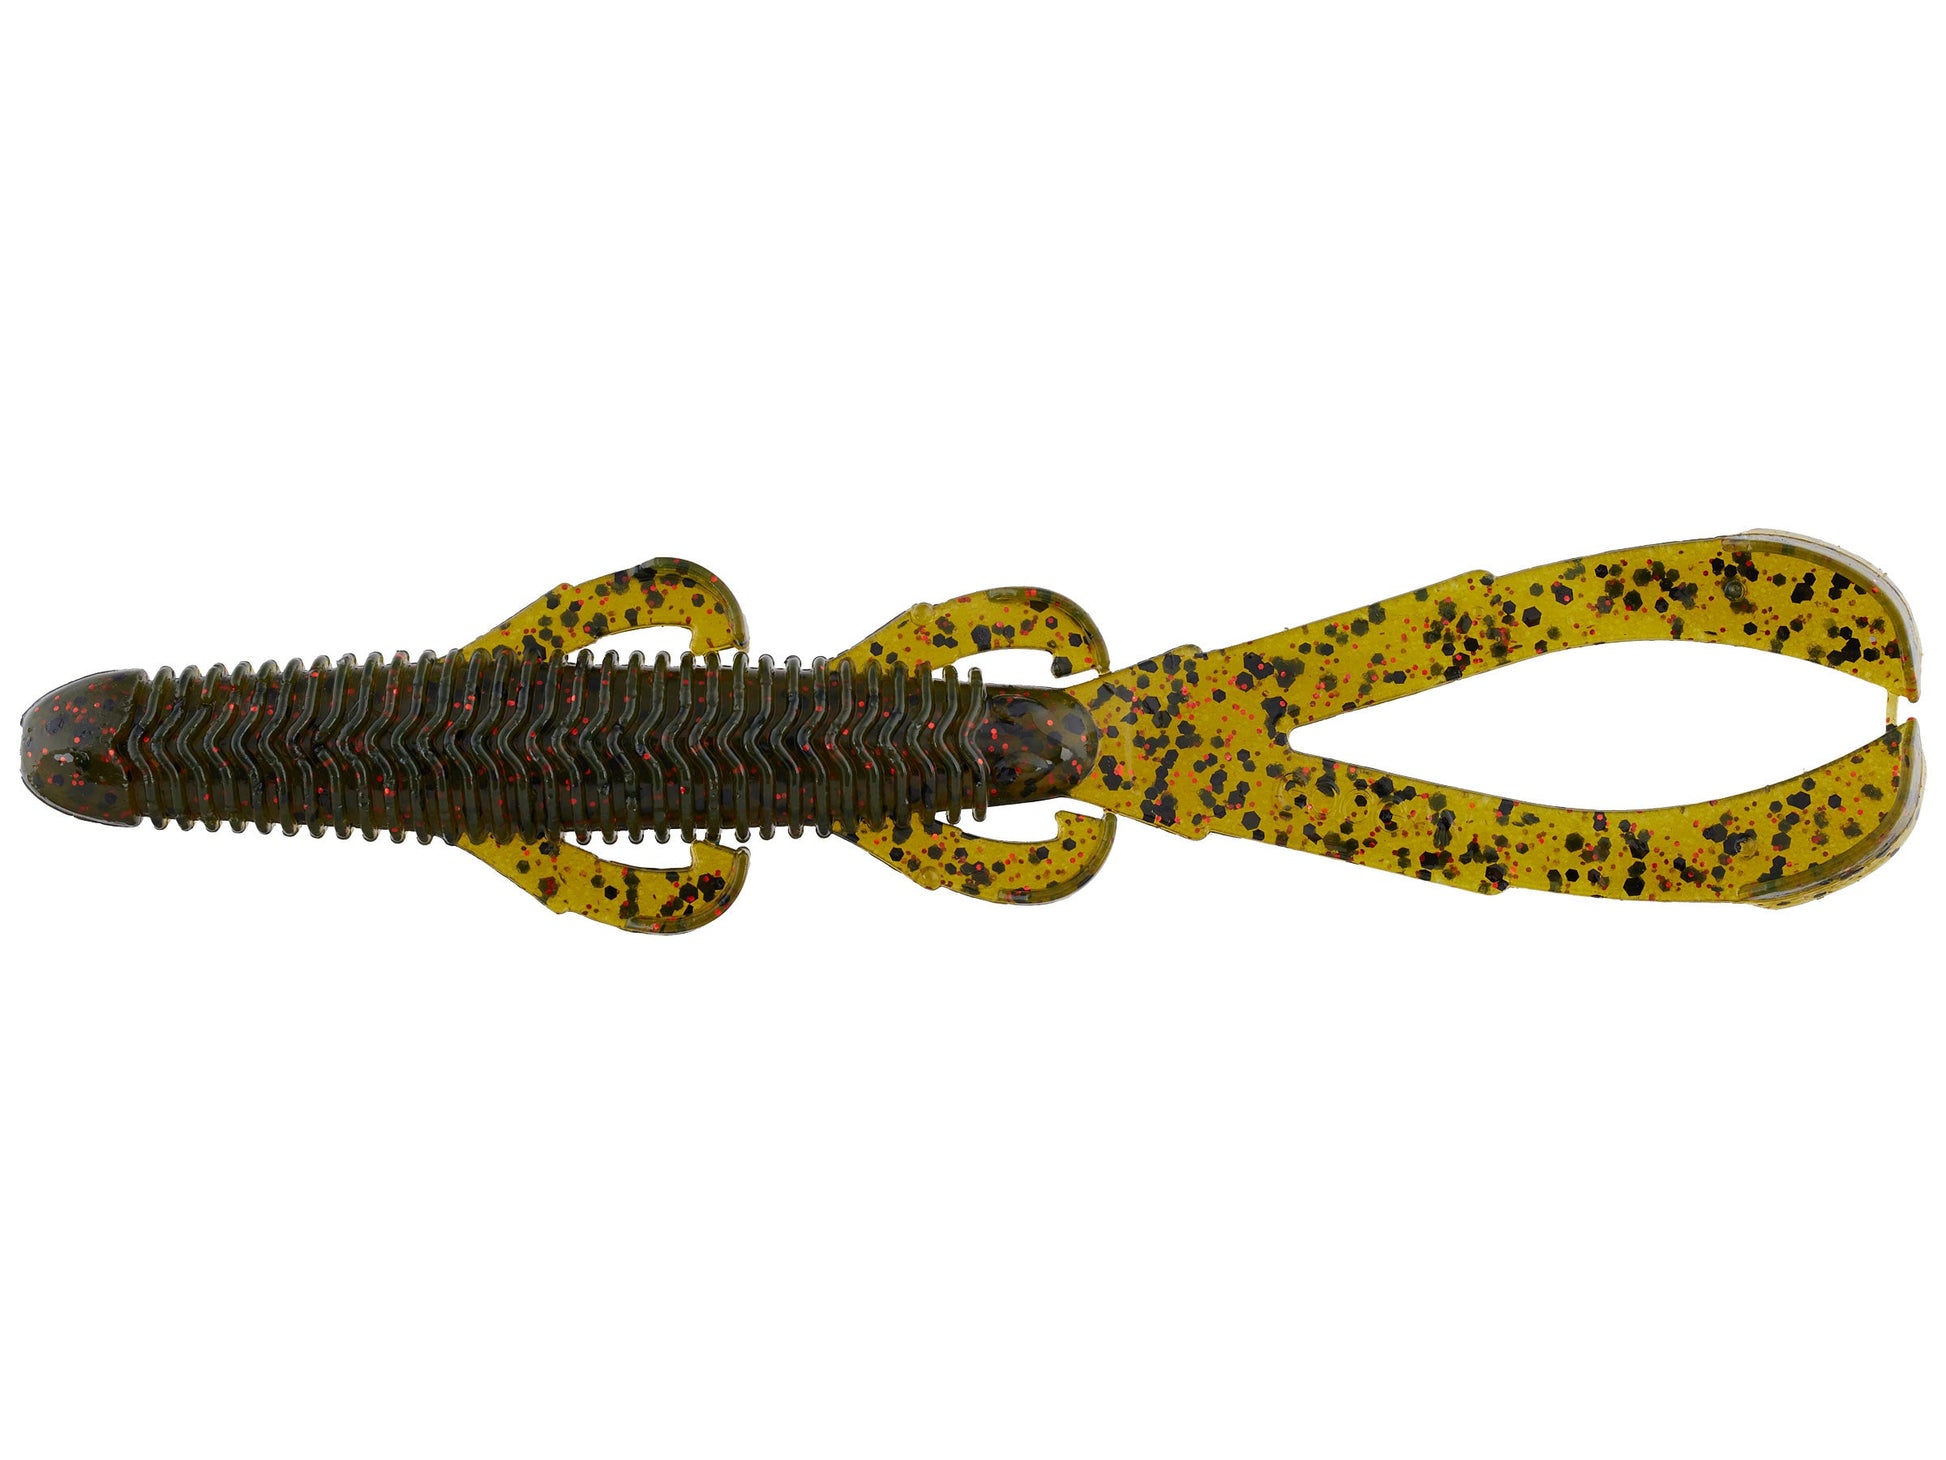 Googan Trench Hawg 4.65 – Lures and Lead